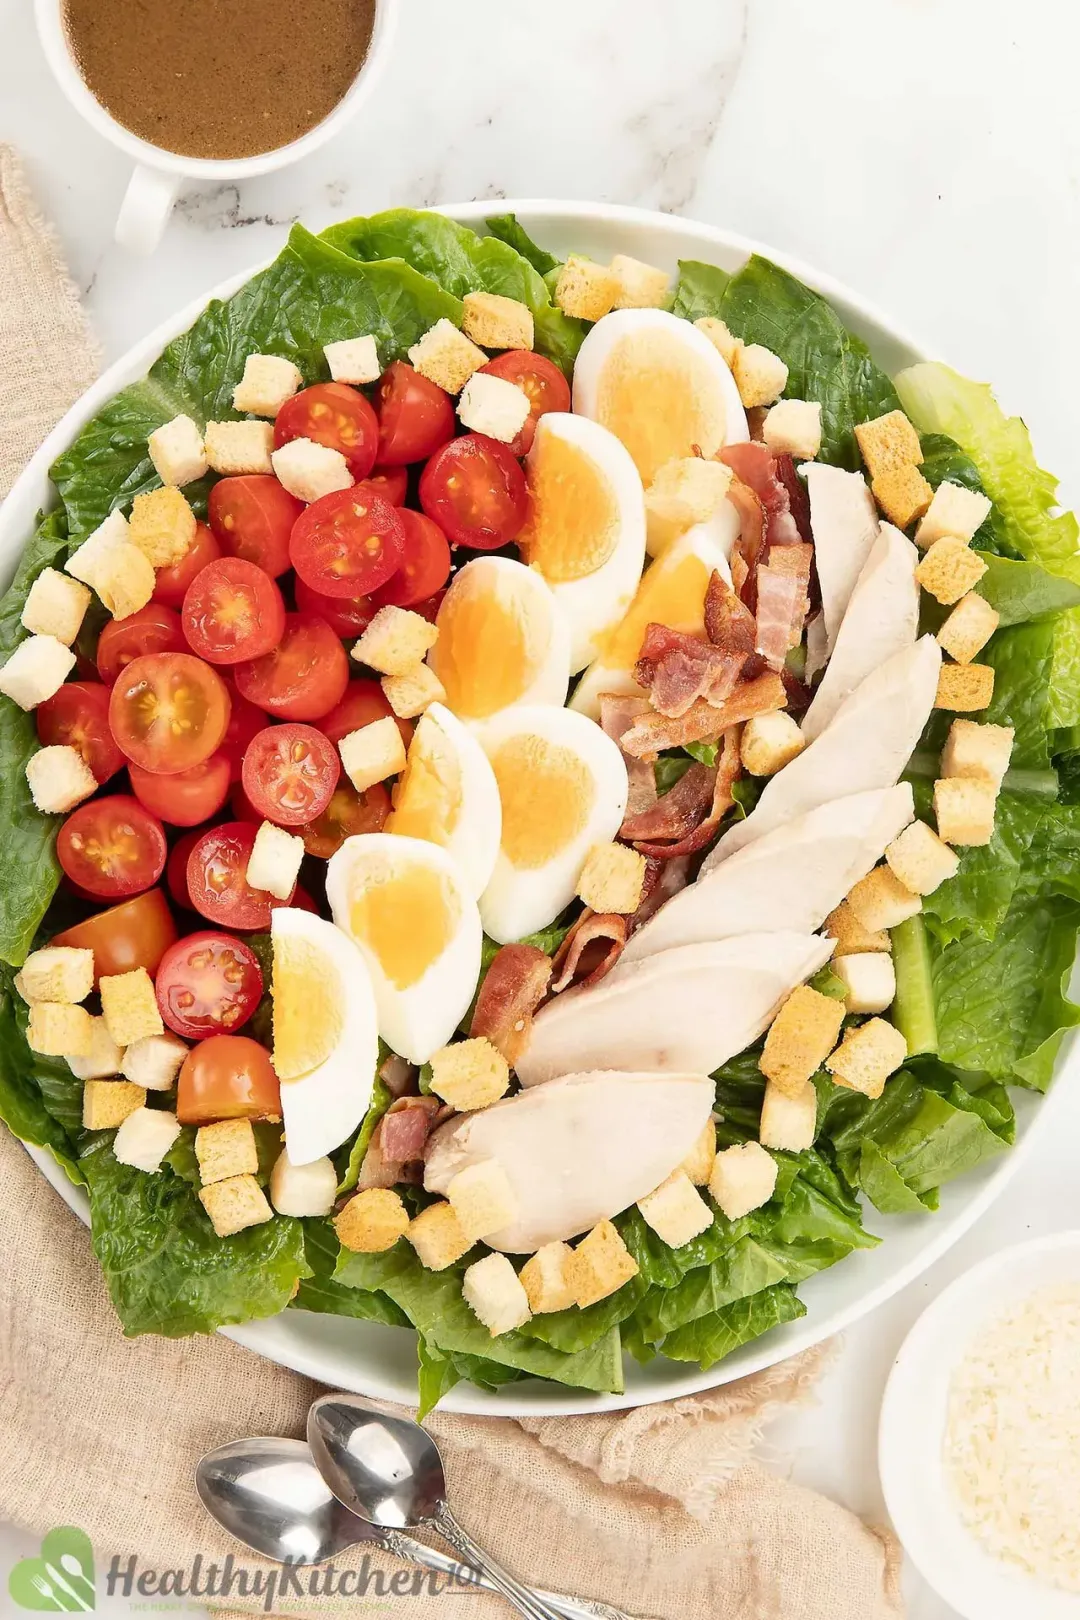 A plate of Caesar salad with lettuce, croutons, eggs quarters, chicken slices, and dressing.